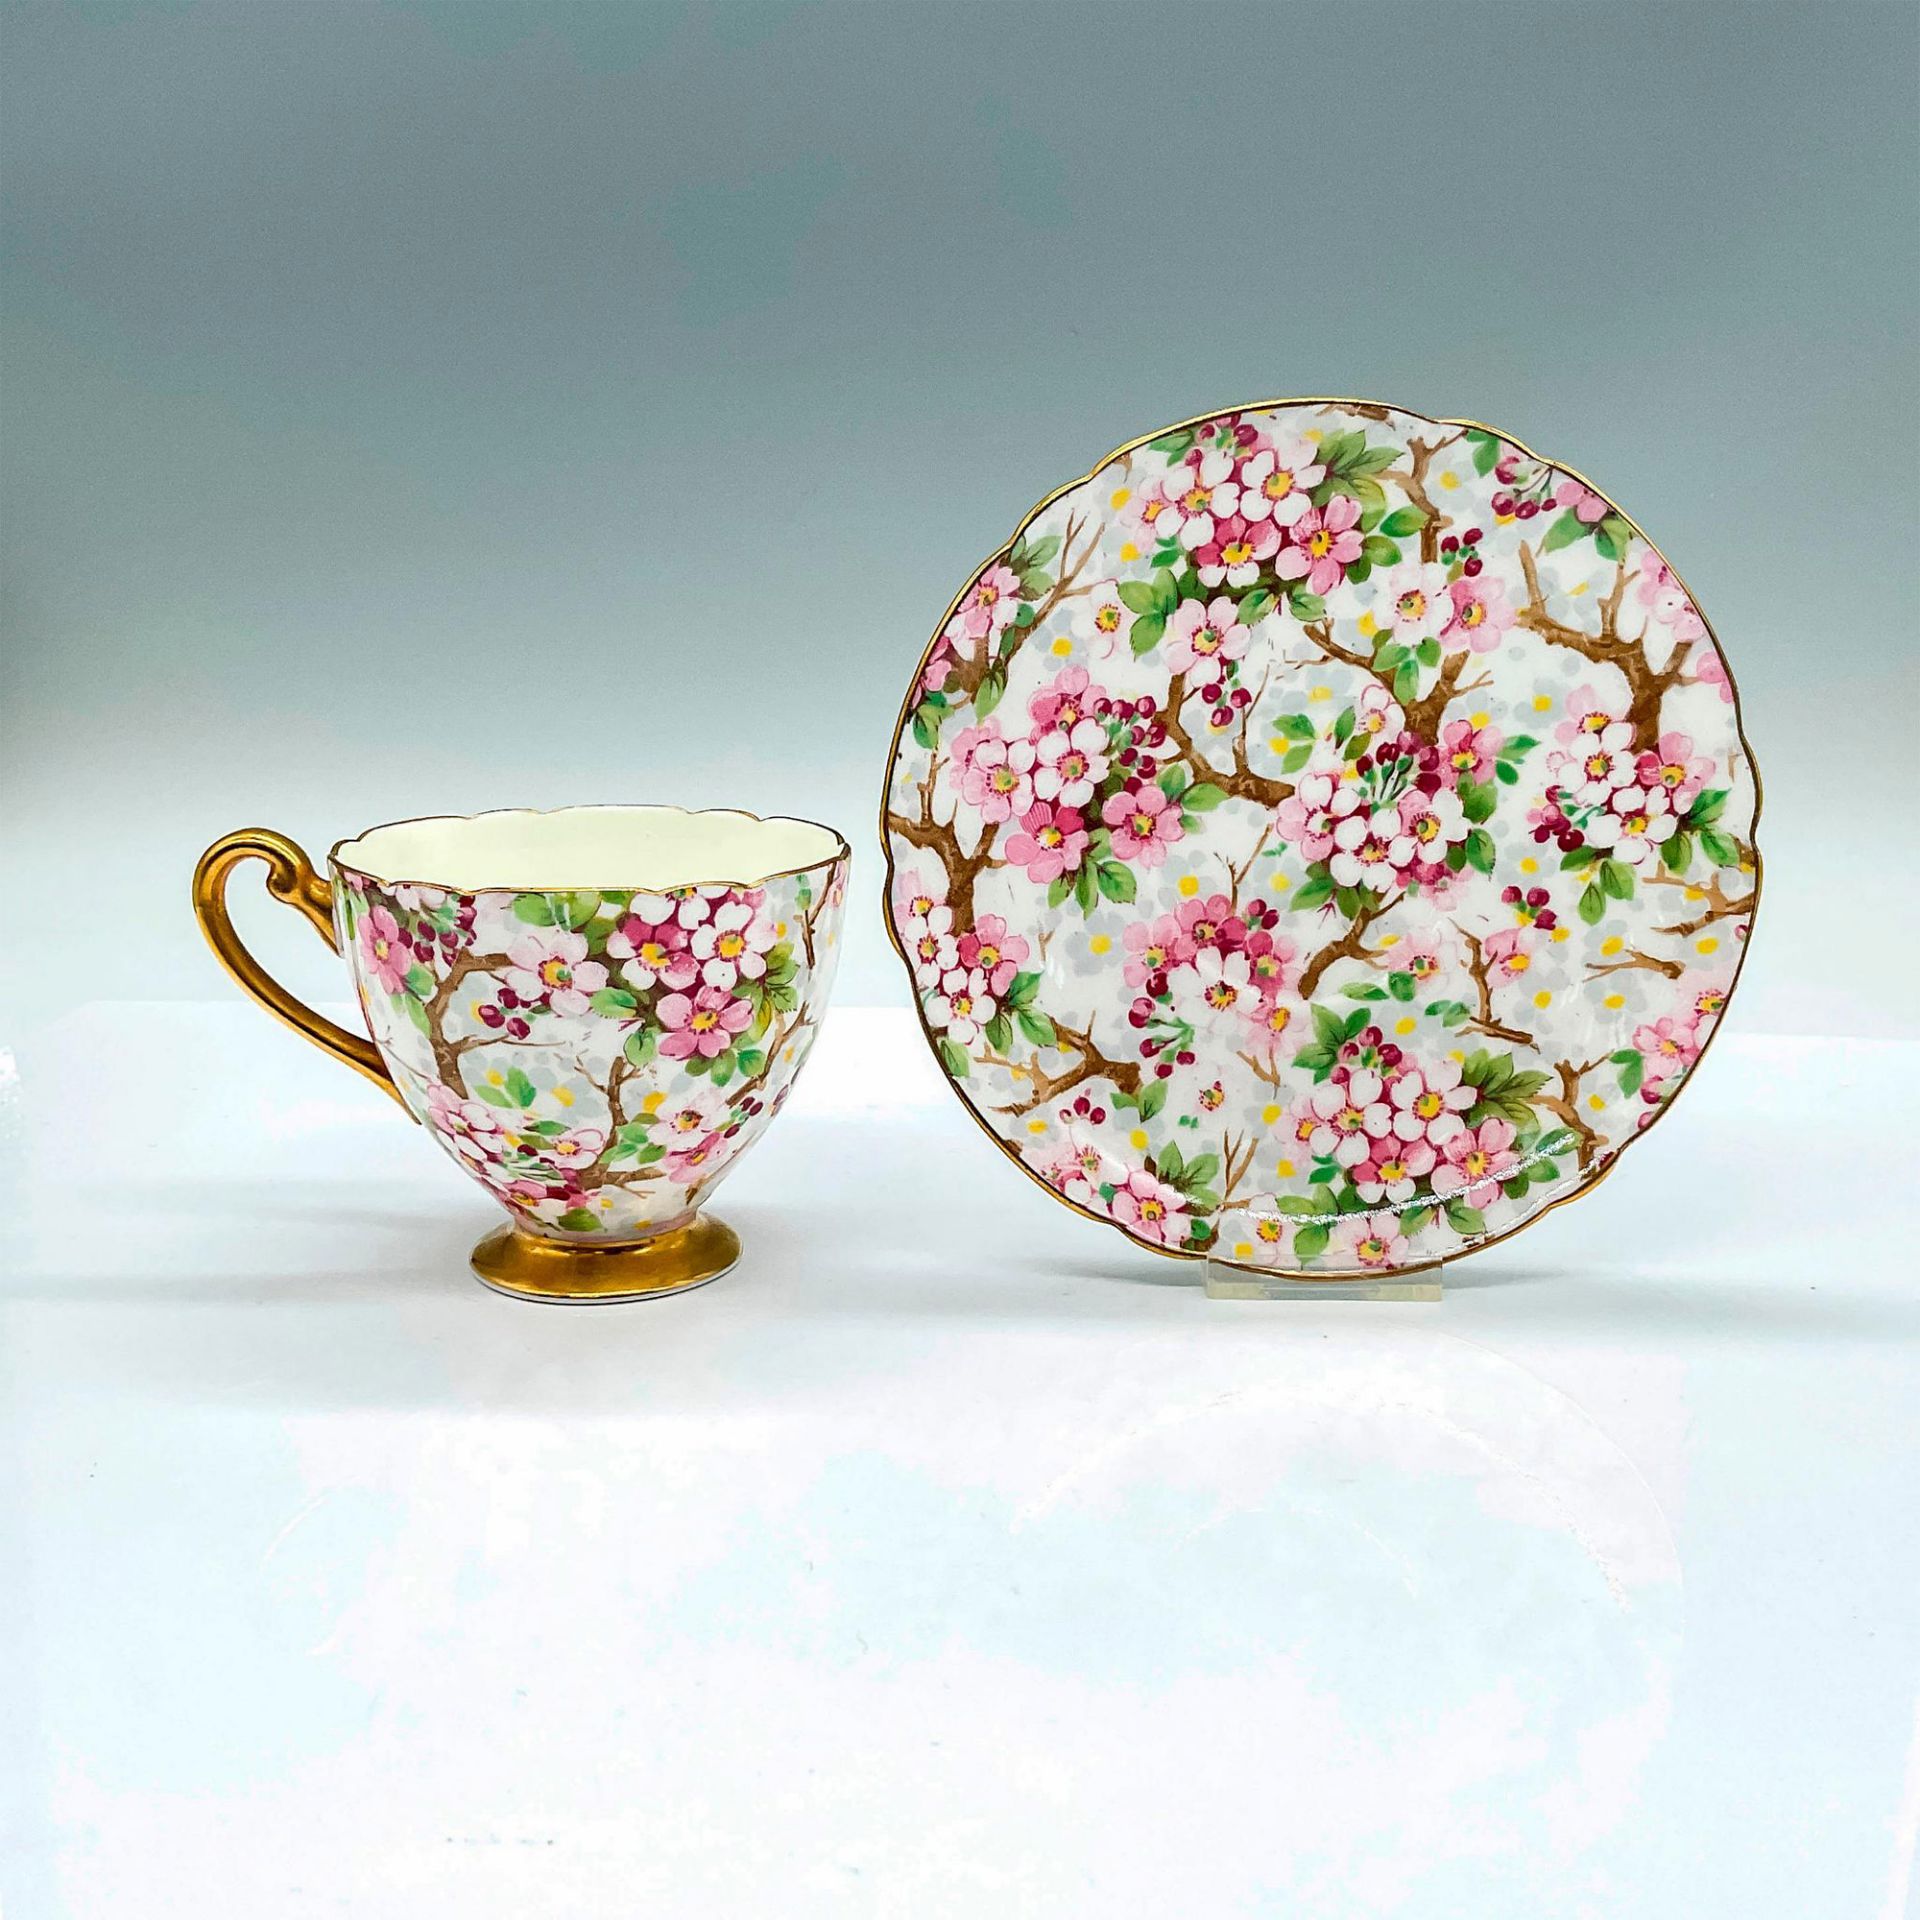 2pc Shelley China Teacup and Saucer, Maytime - Bild 2 aus 3